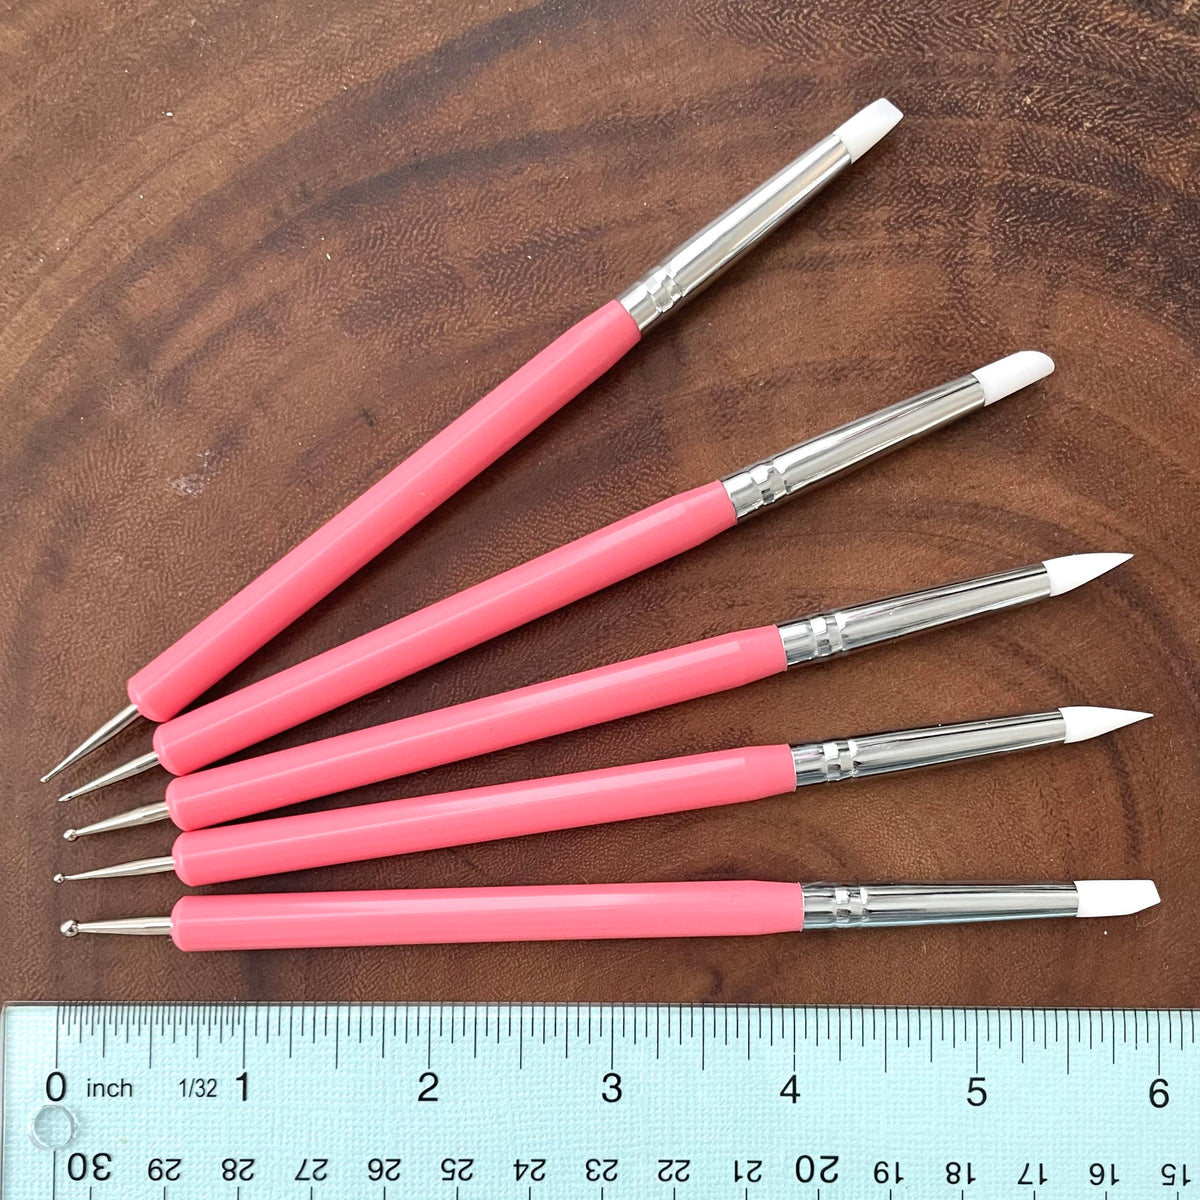 Silicone & Stainless Steel Tools (5 Pieces)